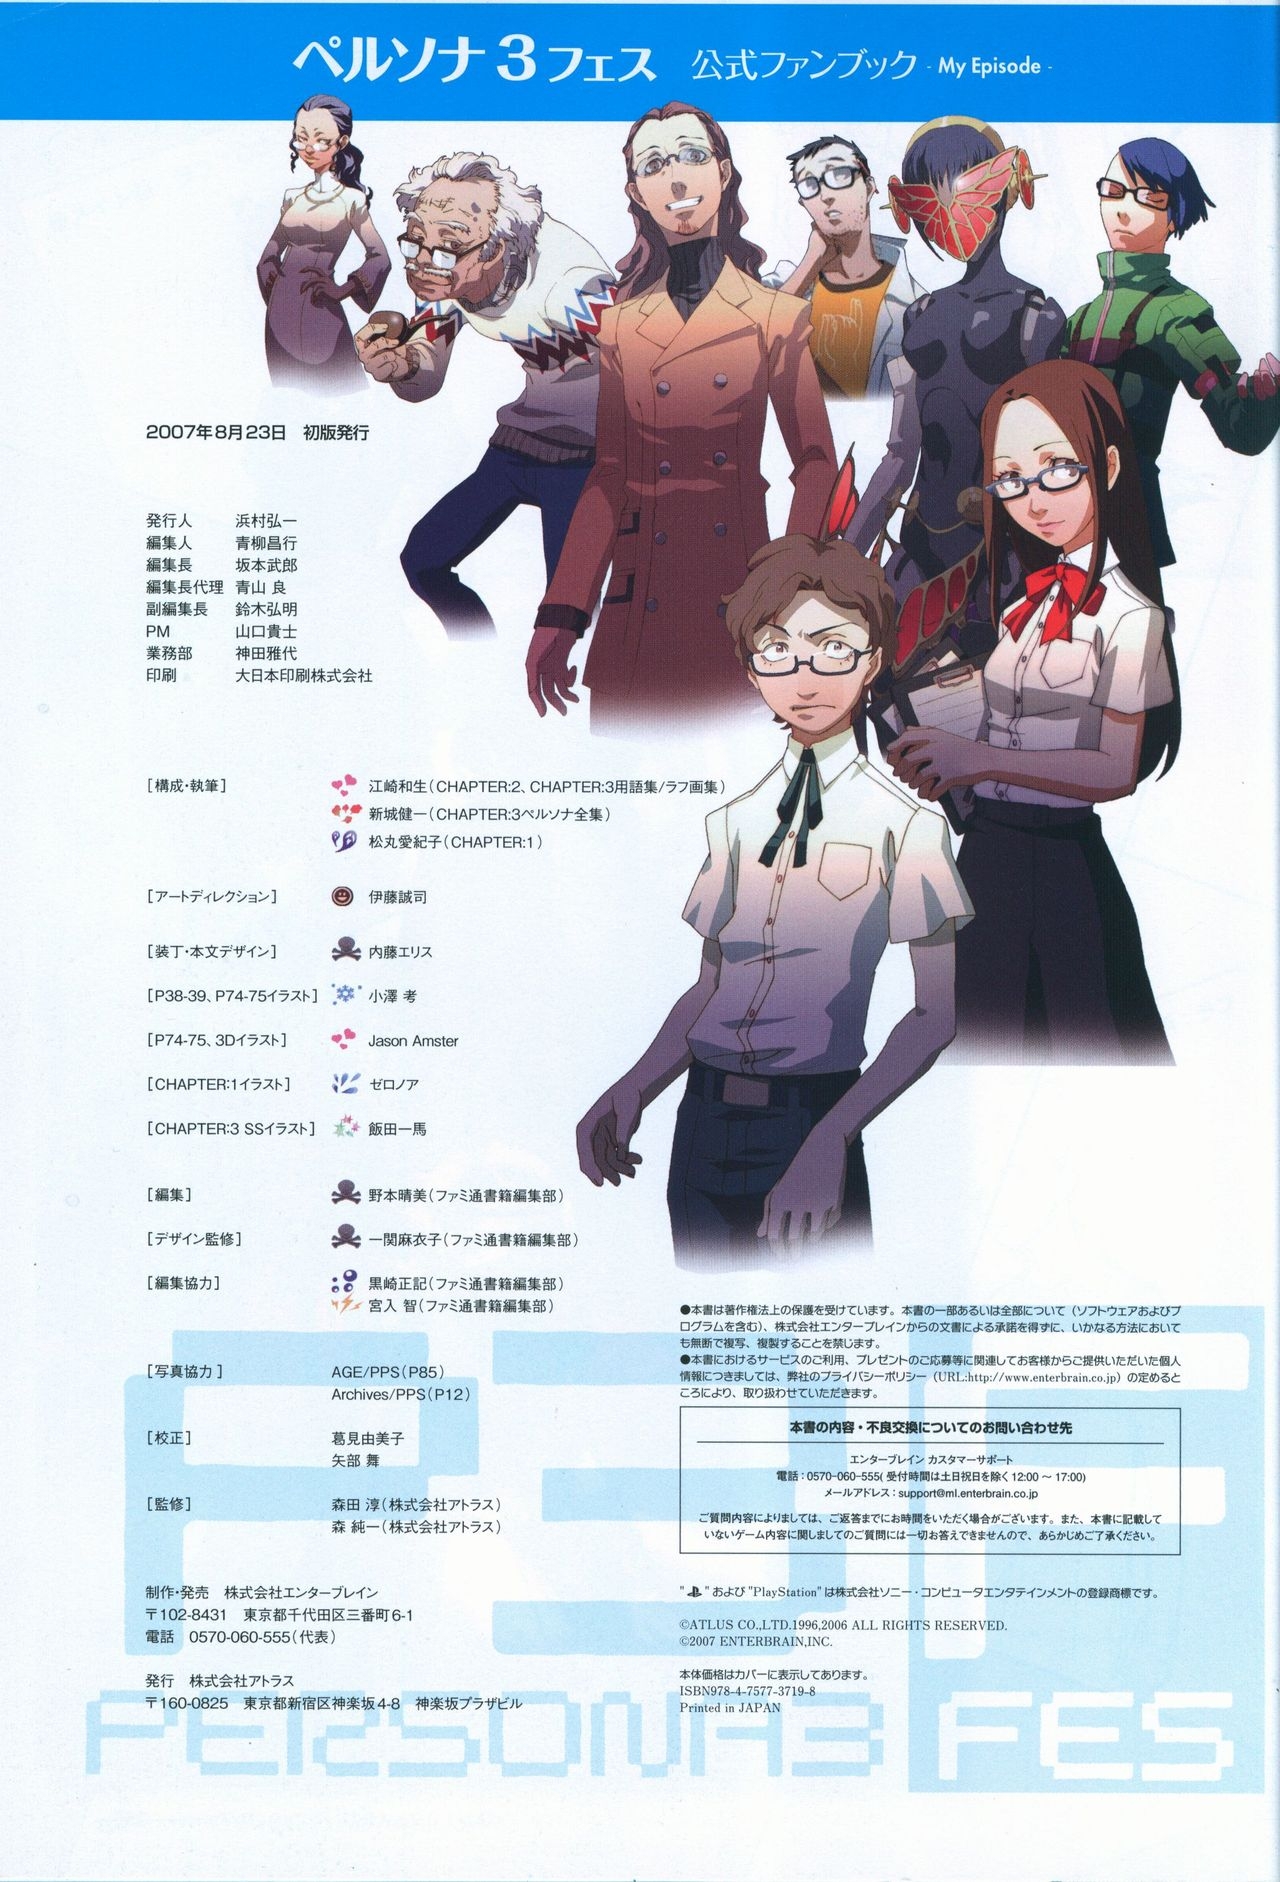 Persona 3 Fes Official Fan Book -My Episode- 257